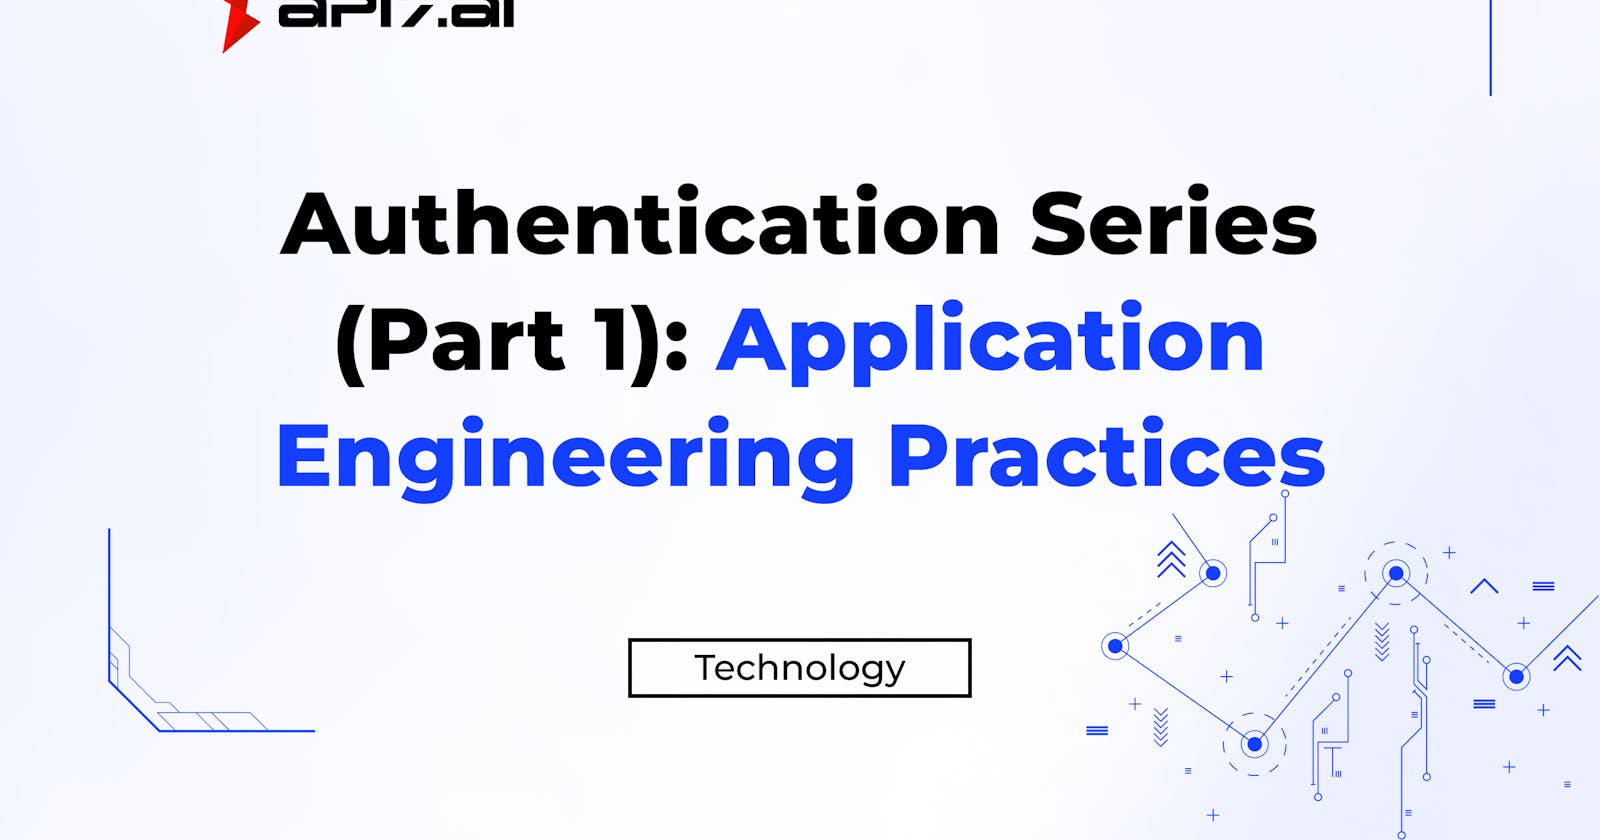 Authentication Series (Part 1): Application Engineering Practices